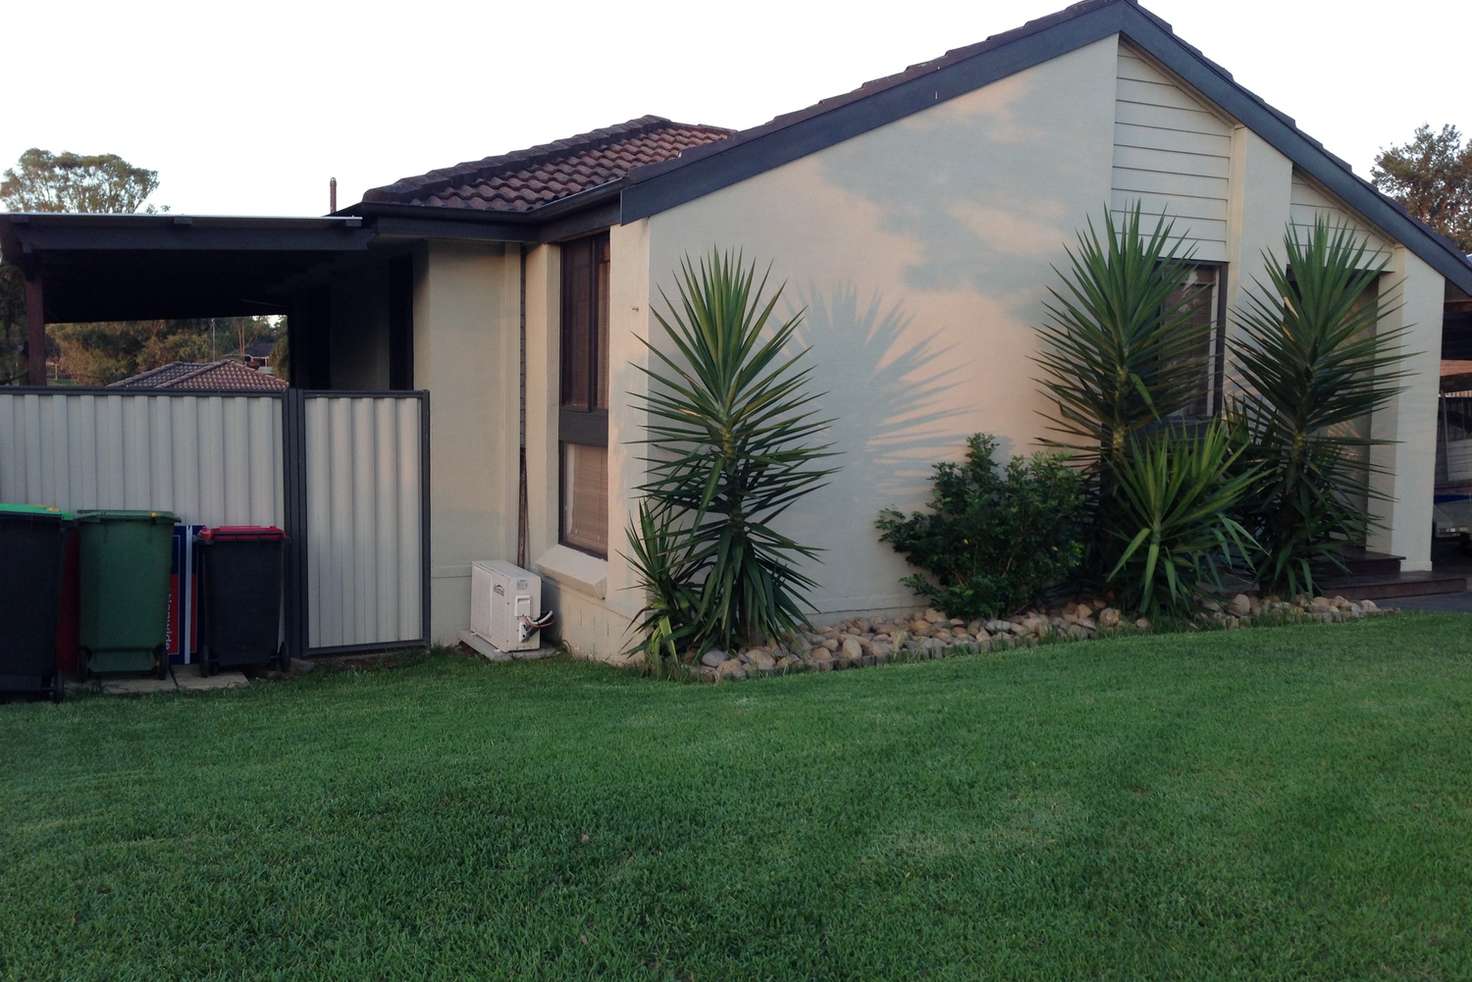 Main view of Homely house listing, 33 Pelsart Avenue, Penrith NSW 2750